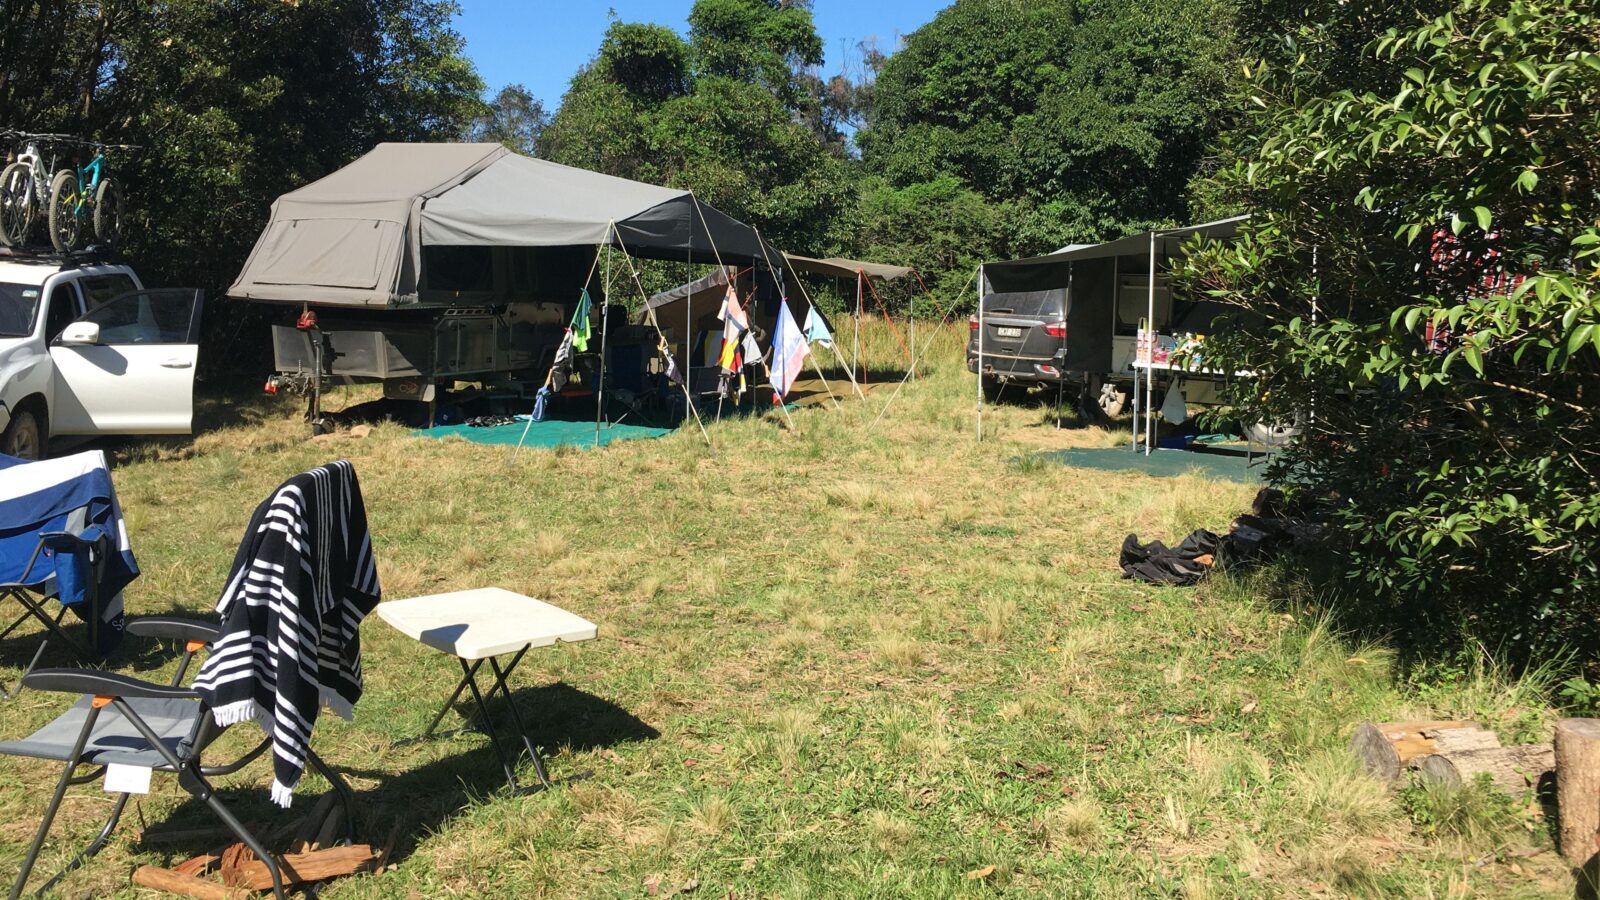 Campers on Site 4